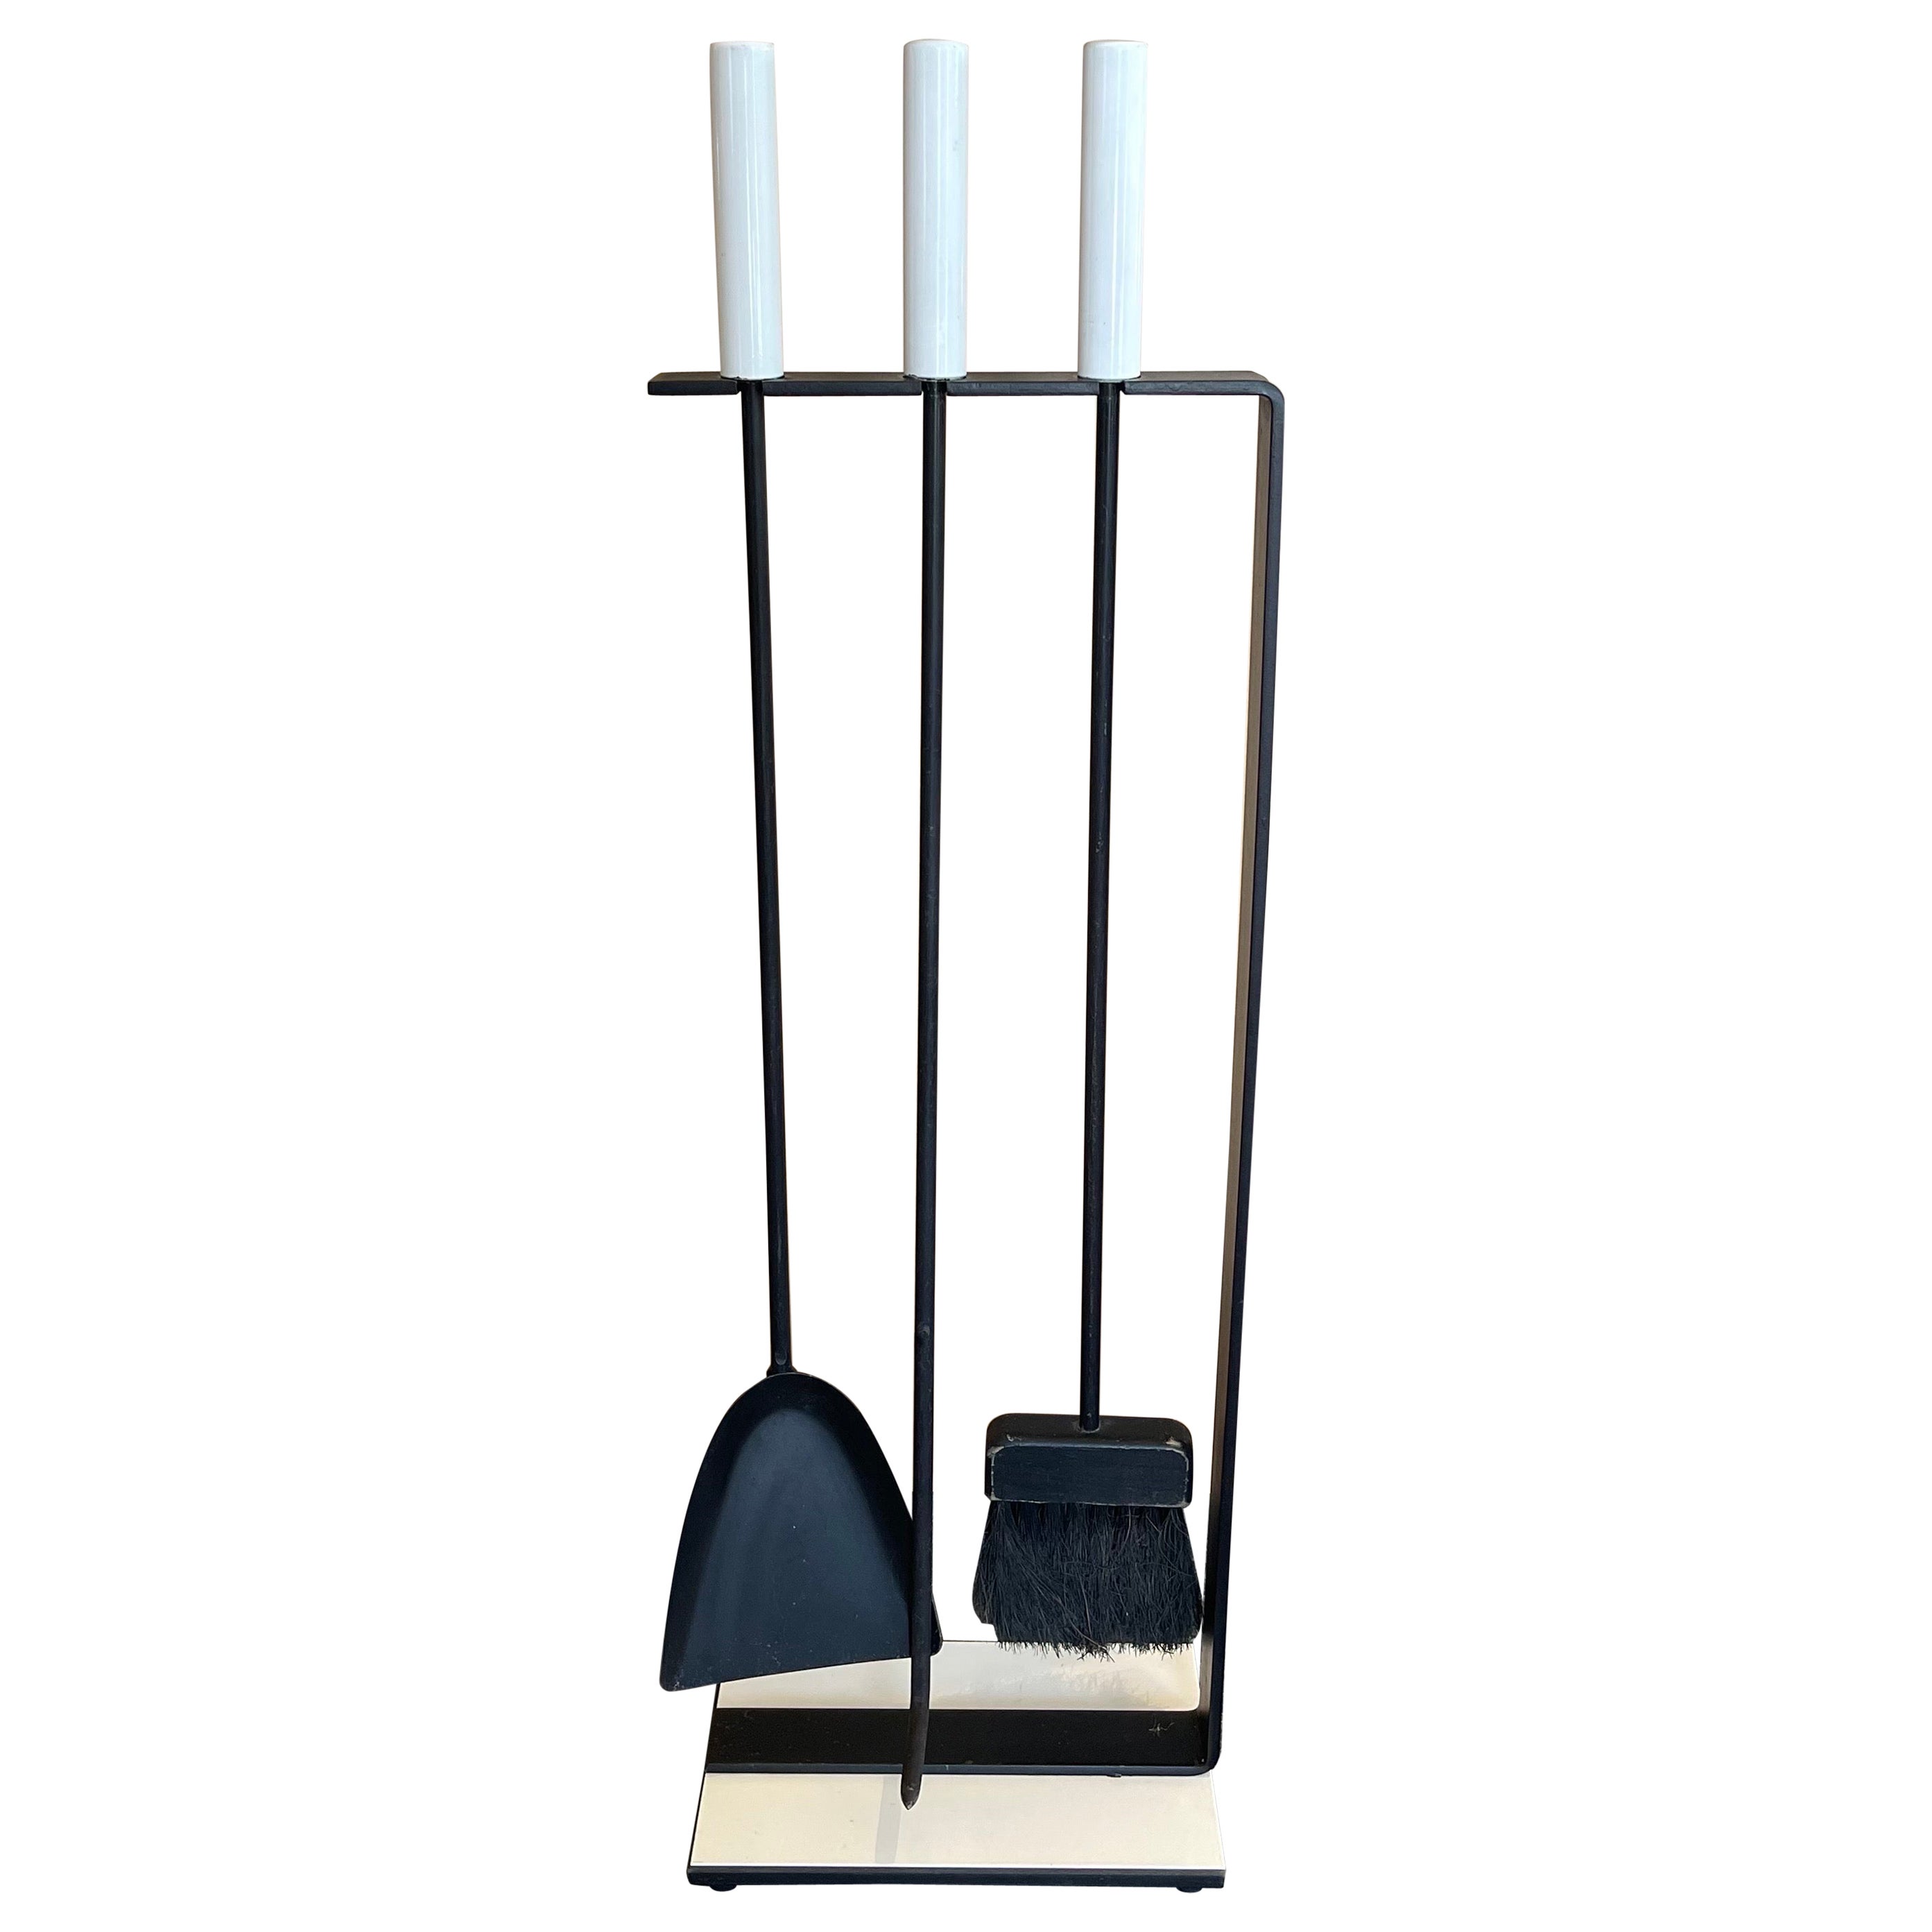 Set of Modernist Fireplace Tools with White Enamel Handles by Pilgrim